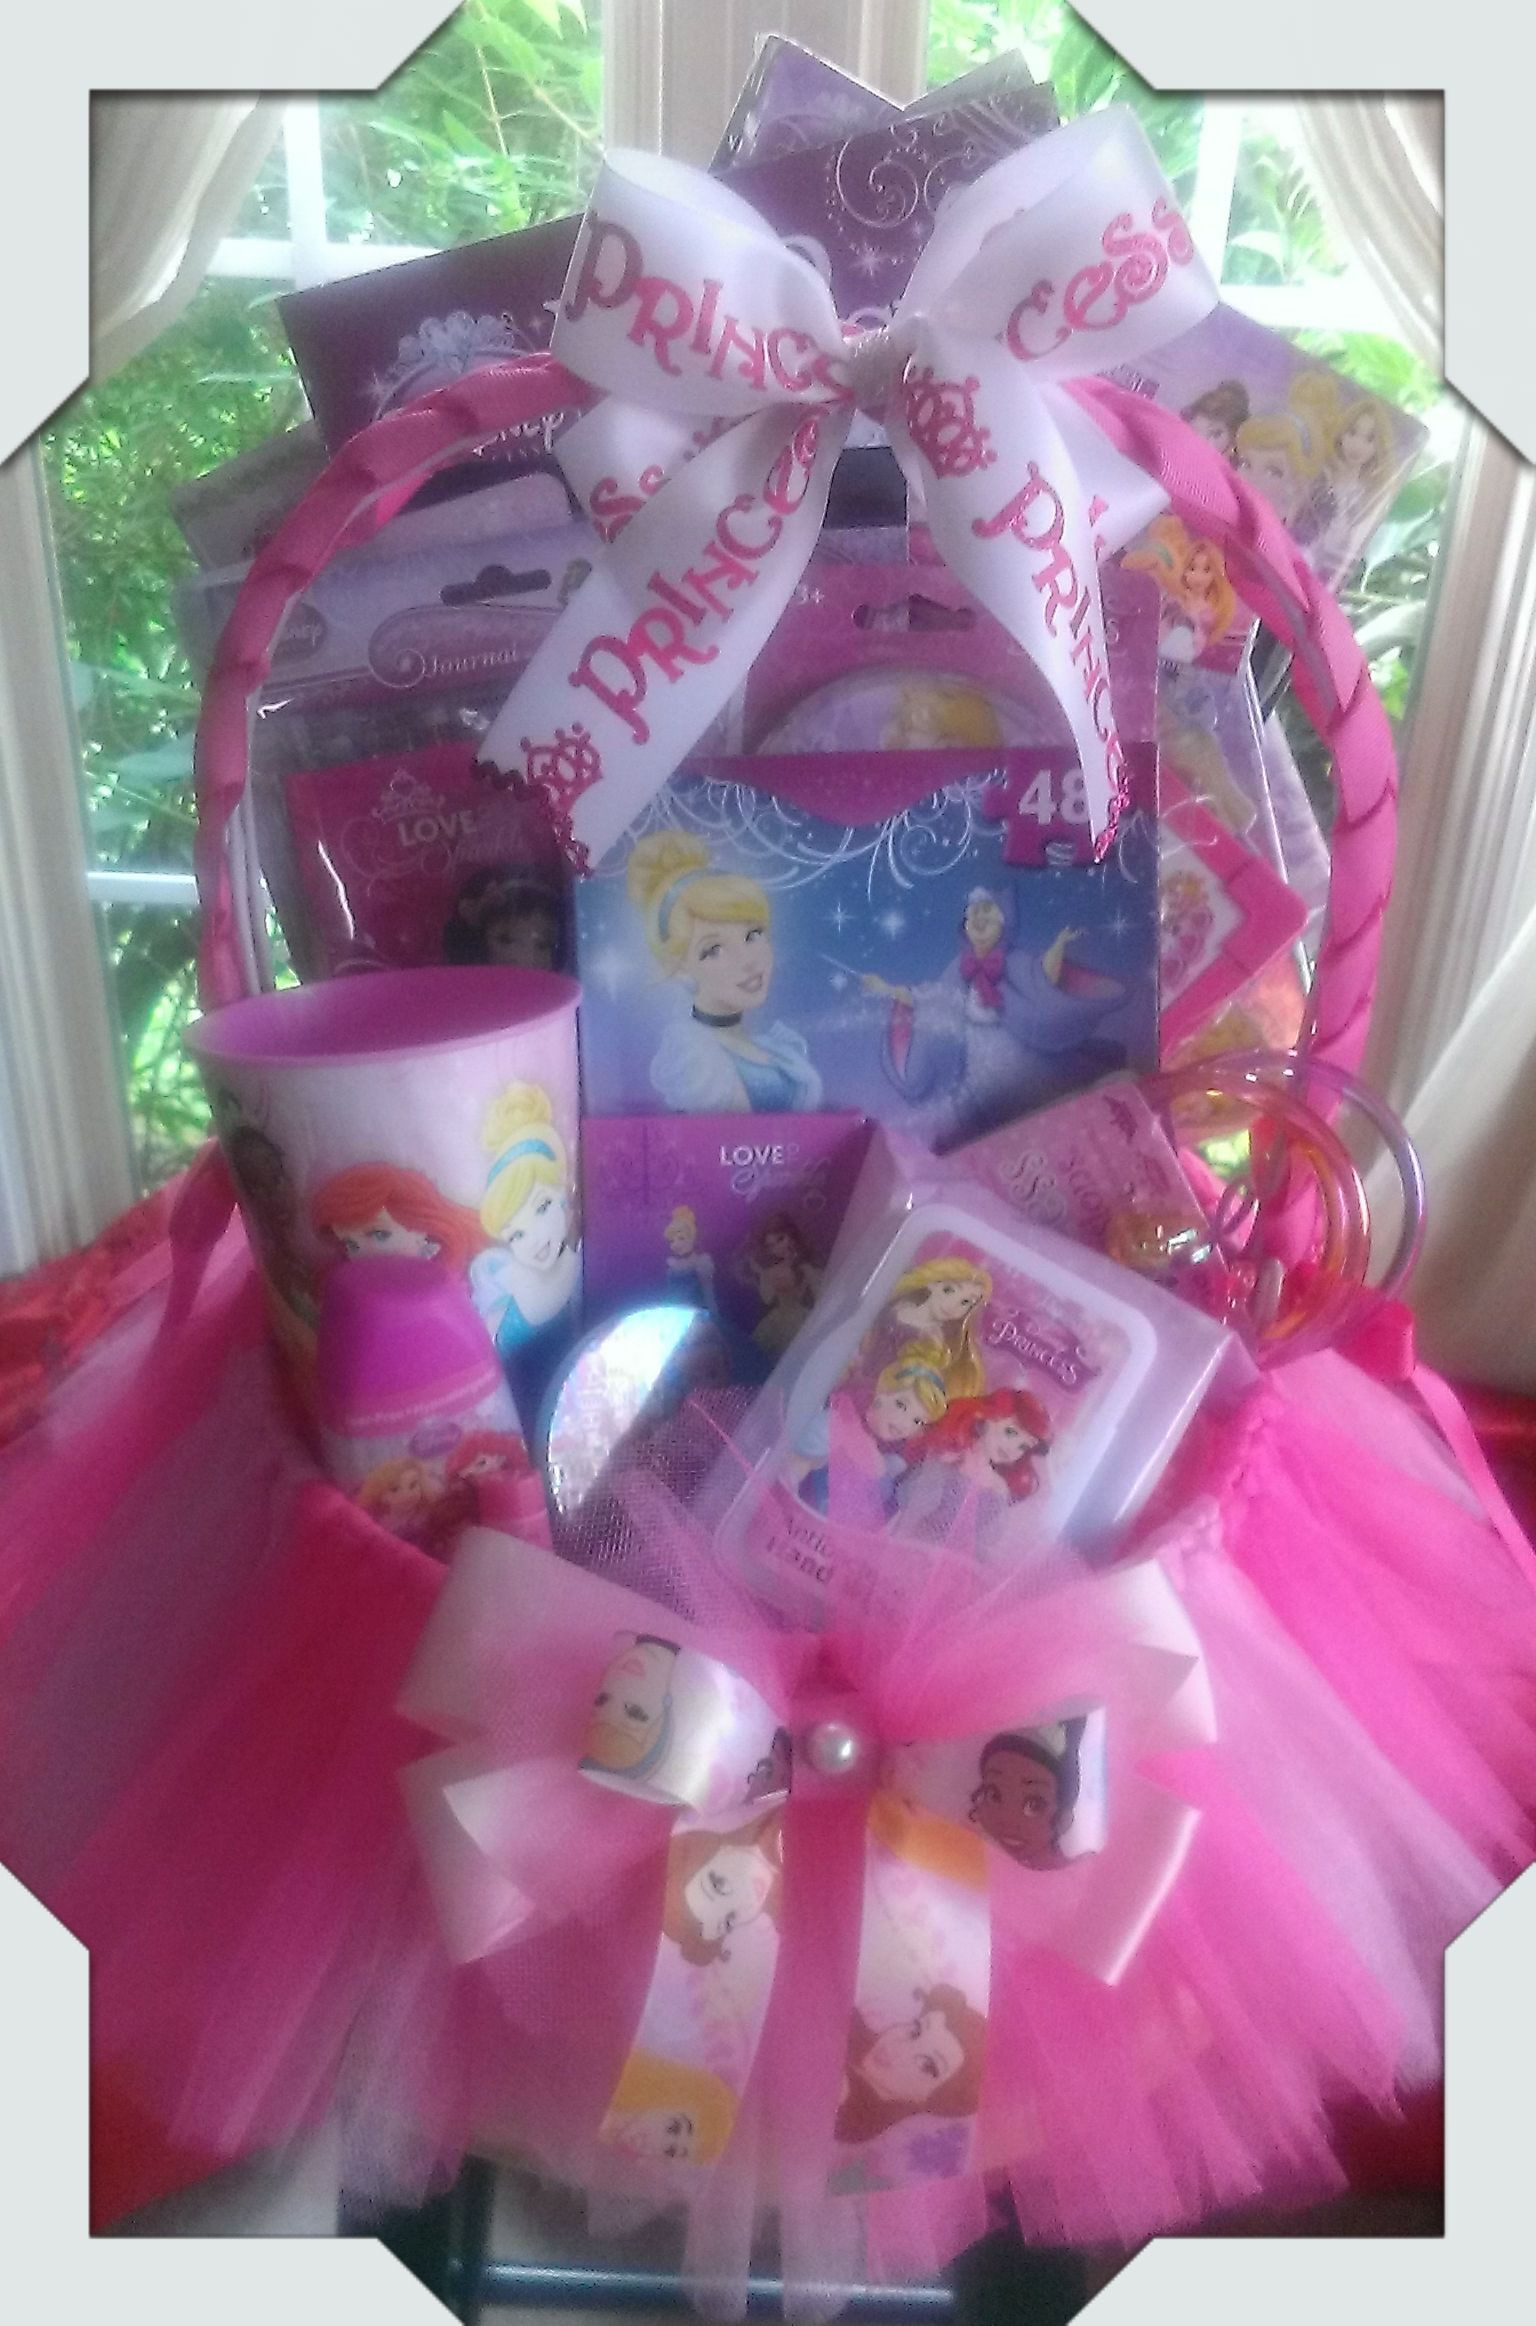 Princess Gift Basket Ideas
 Disney Princess Gift Basket Made By Norma s Unique Gift